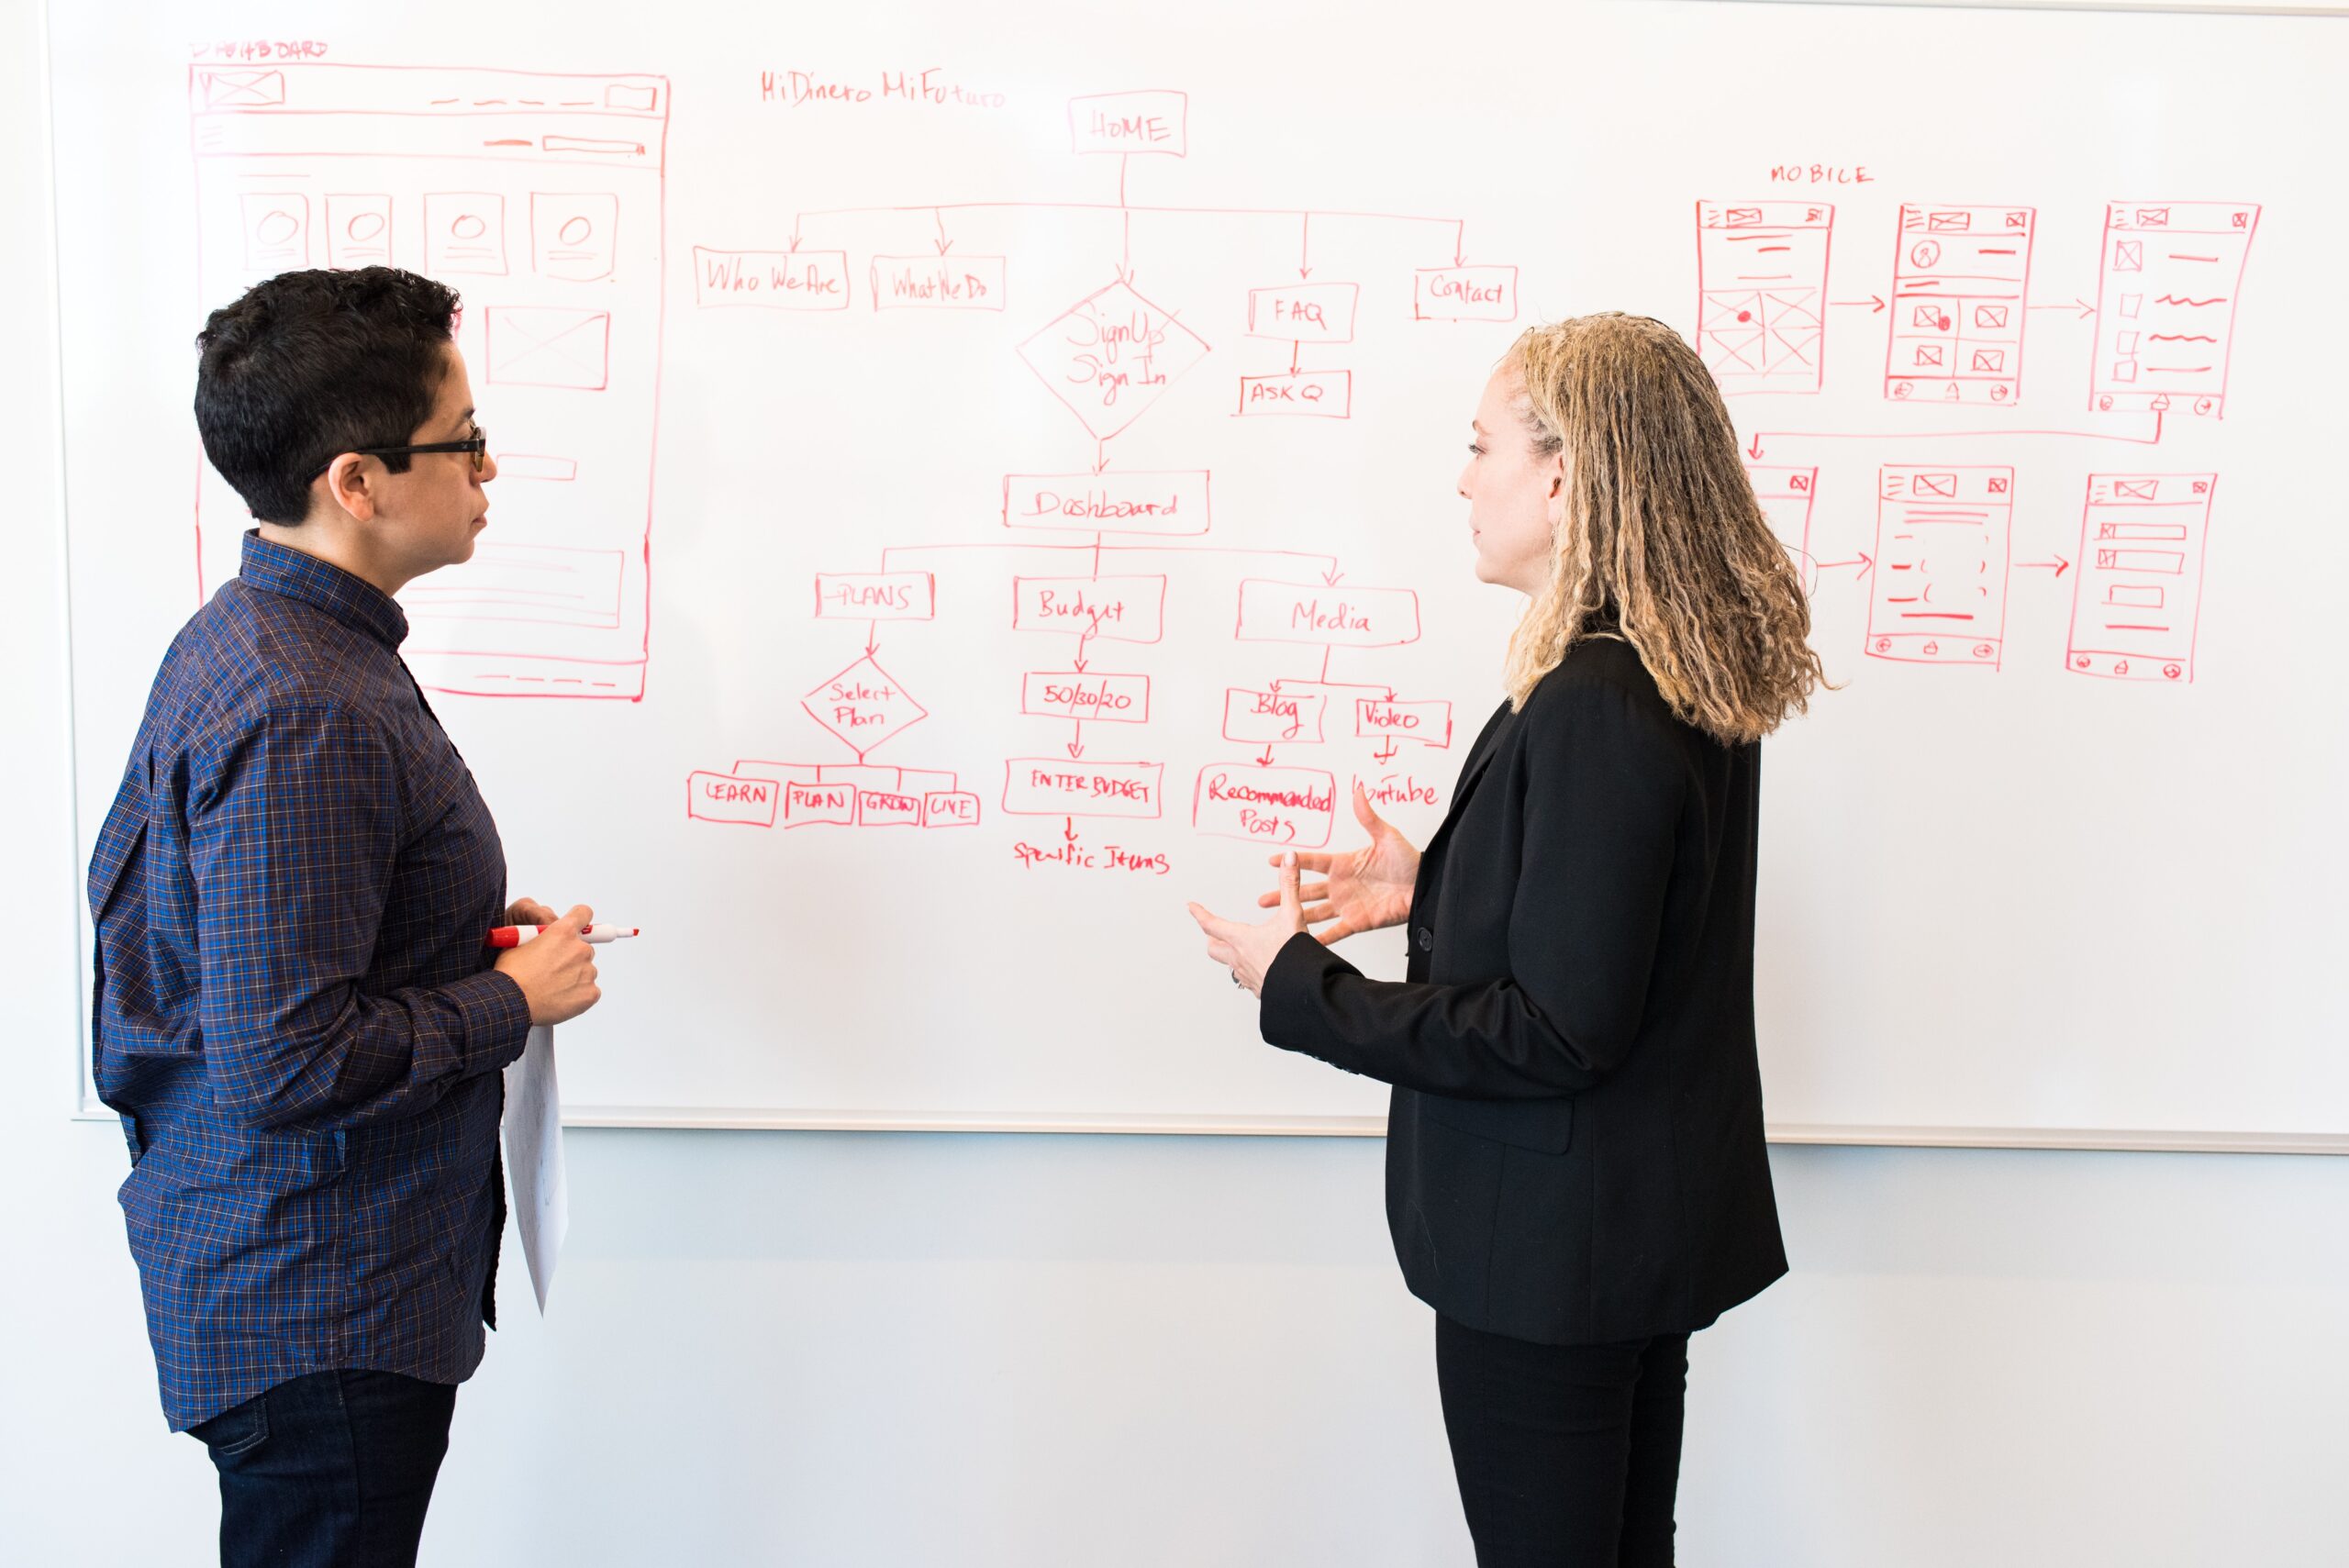 Two women standing in front of a whiteboard